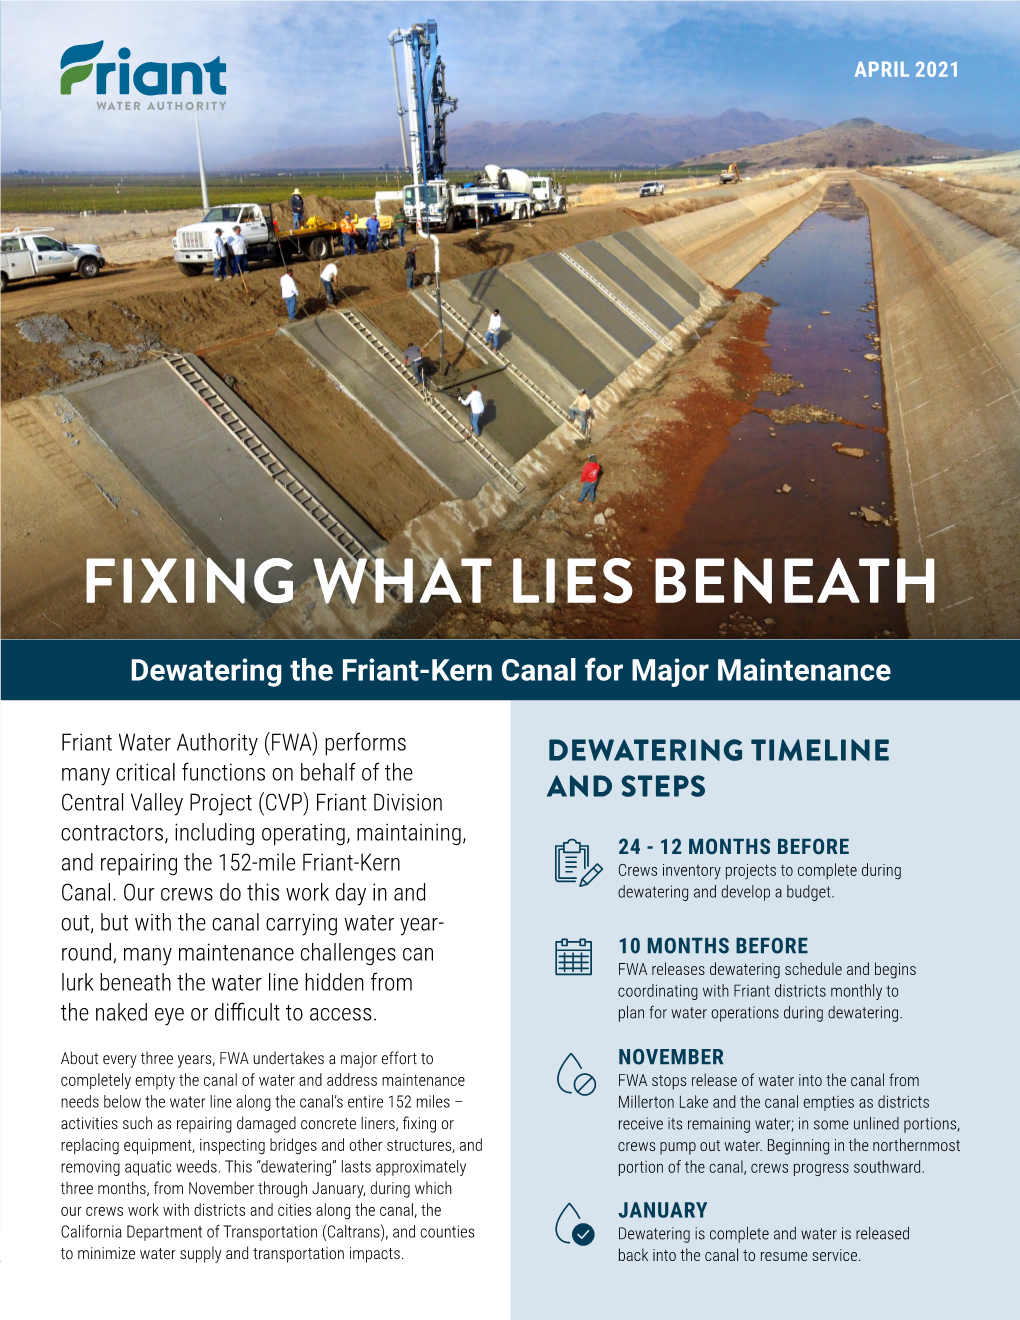 Fixing What Lies Beneath: Dewatering the Friant